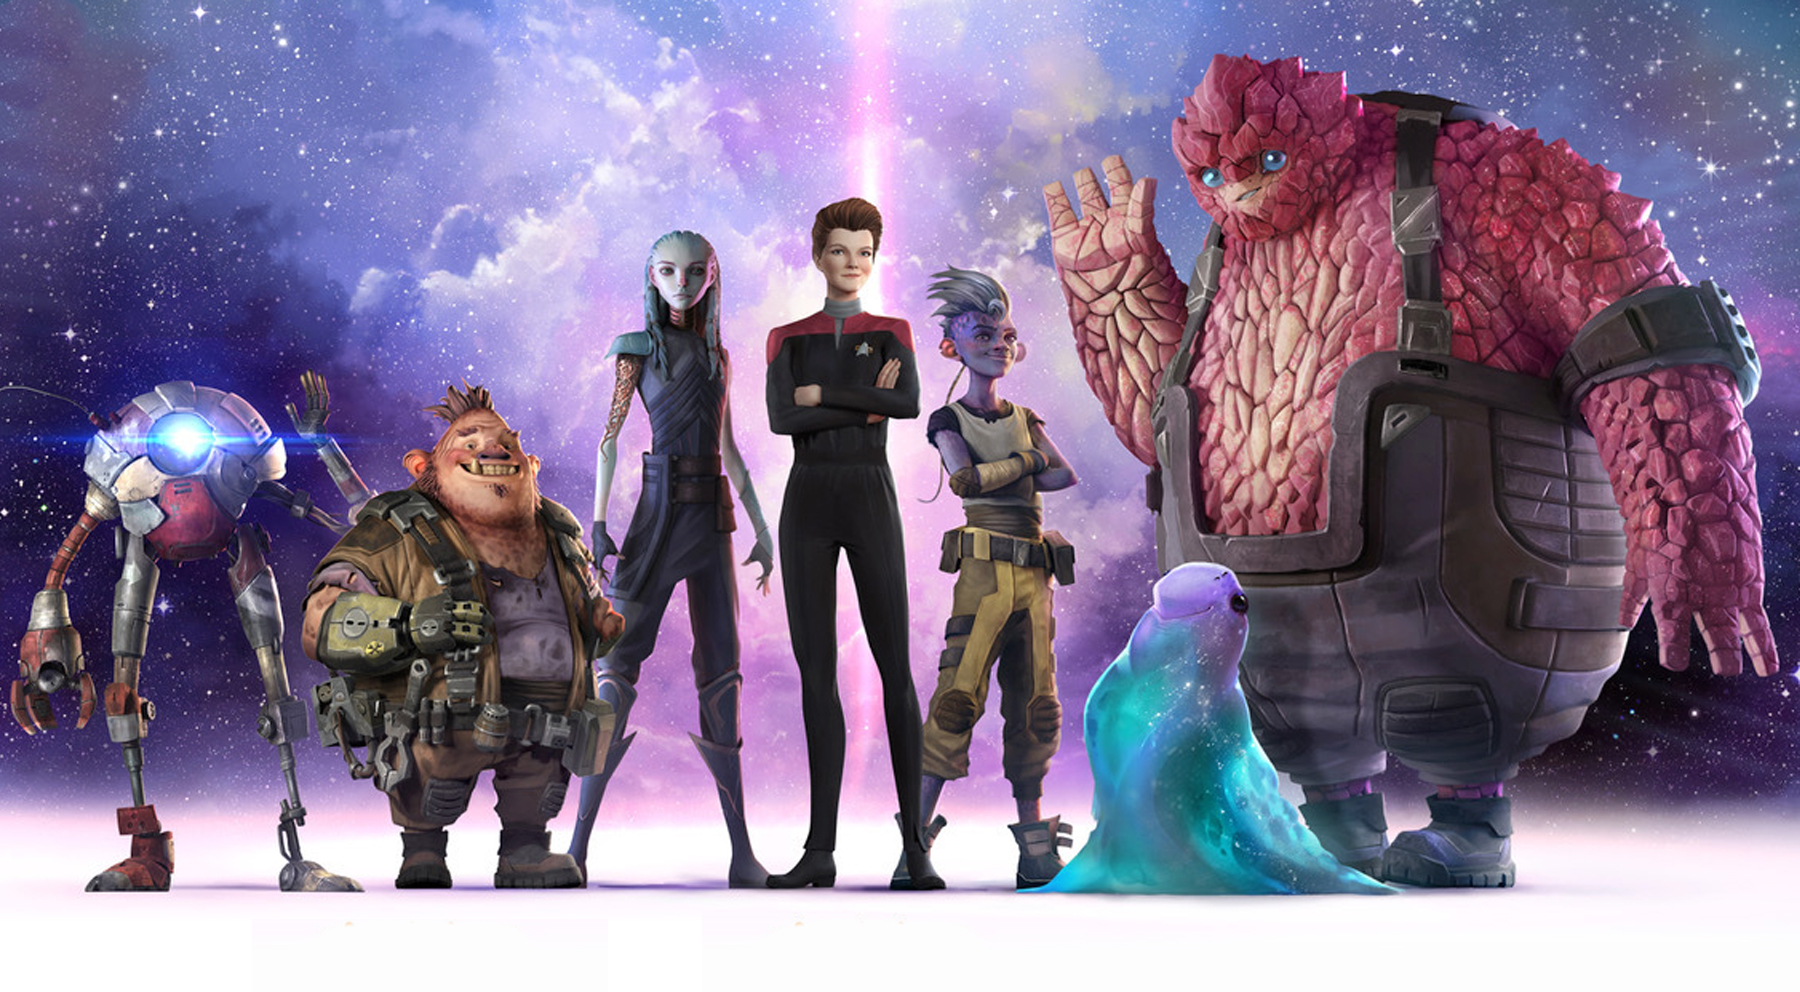 Star Trek: Prodigy' reveals cast and characters | Space